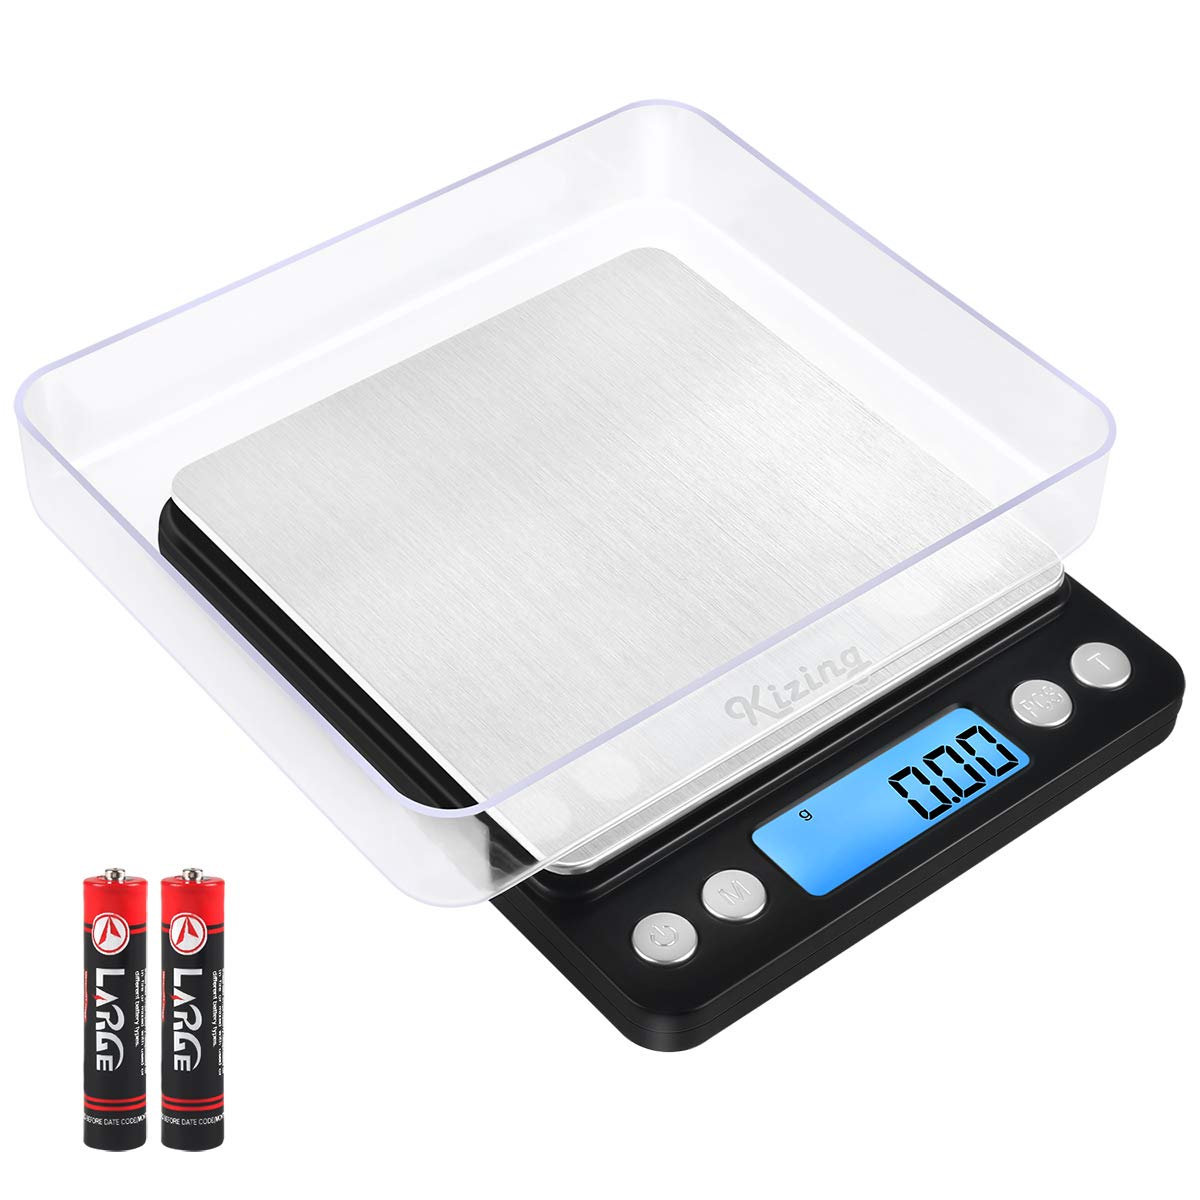 Generies Kizing Digital Kitchen Scale, 500g001g Small Pocket Jewelry Scale, cooking Food Scale with Backlit LcD Display, Food Scales Digi